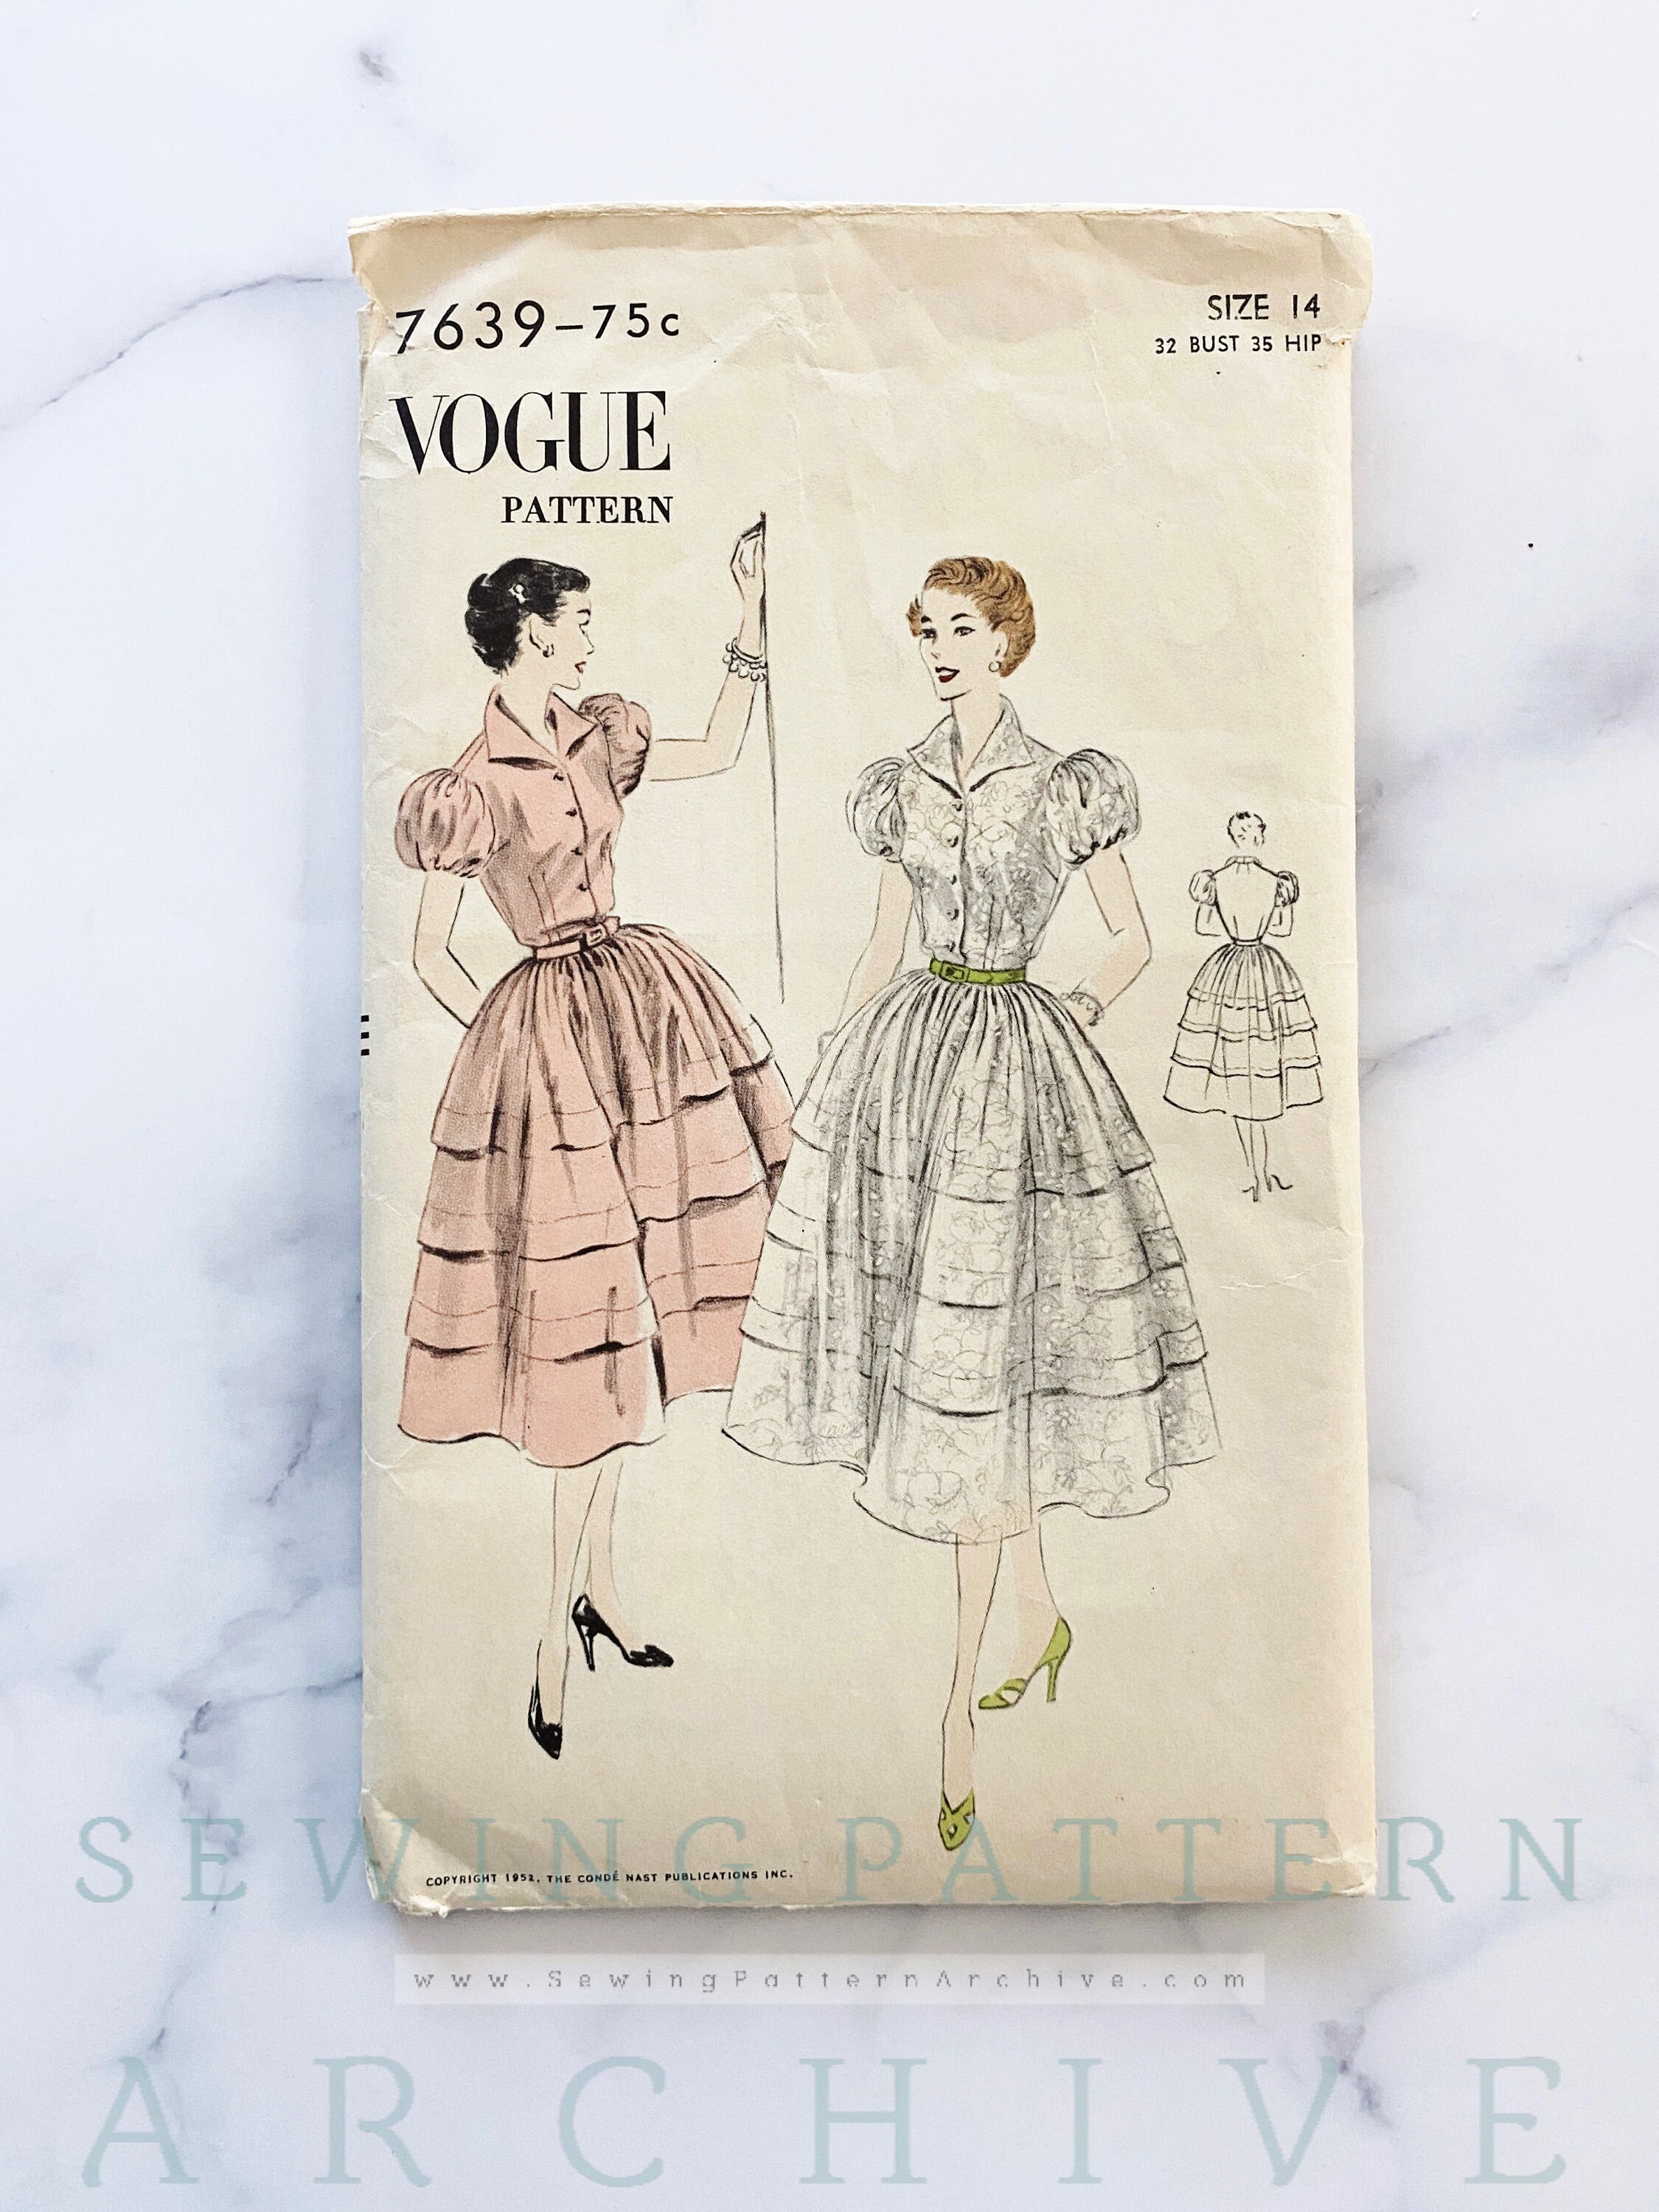 Pattern Storage Bags for Vintage Sewing Patterns. 20pcs. Archival Safe Poly  Bags Sewing Pattern Storage. Fits Simplicity, Vogue, Butterick 